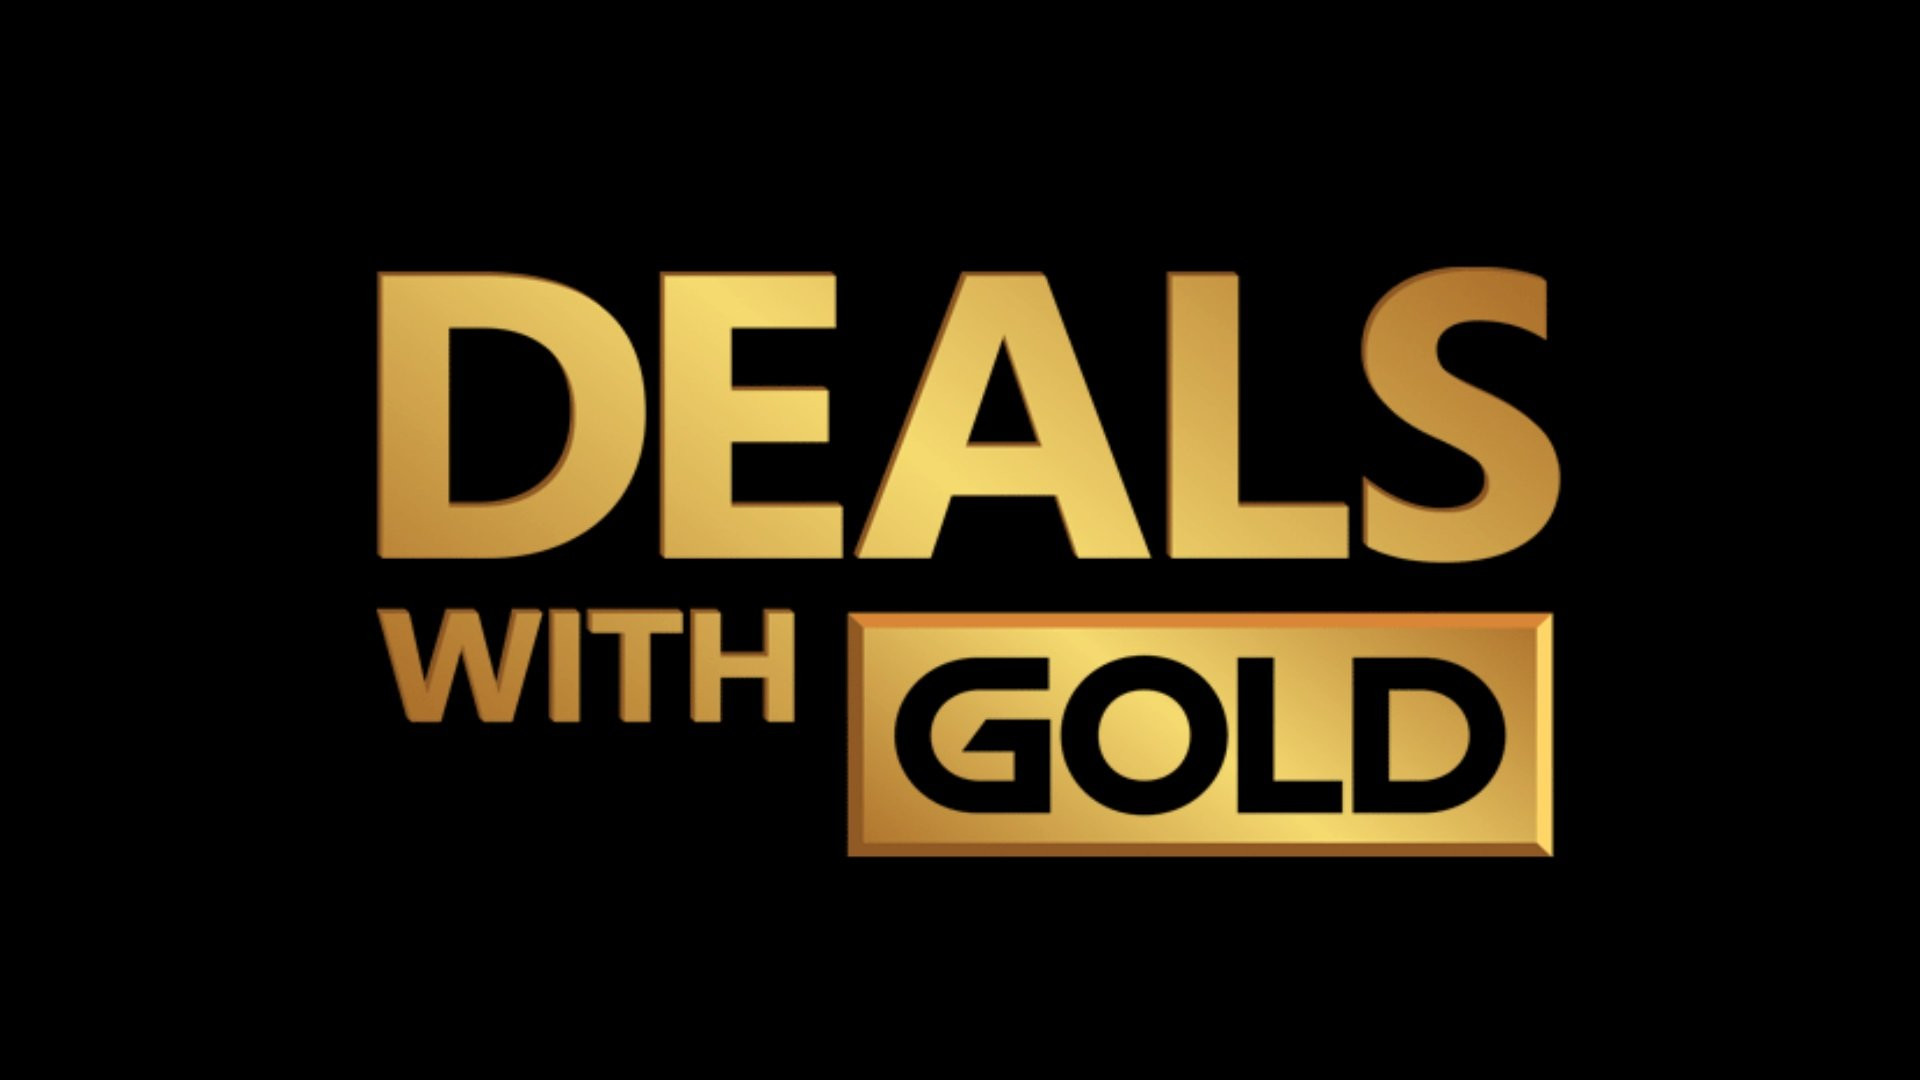 Deals with Gold semaine 8